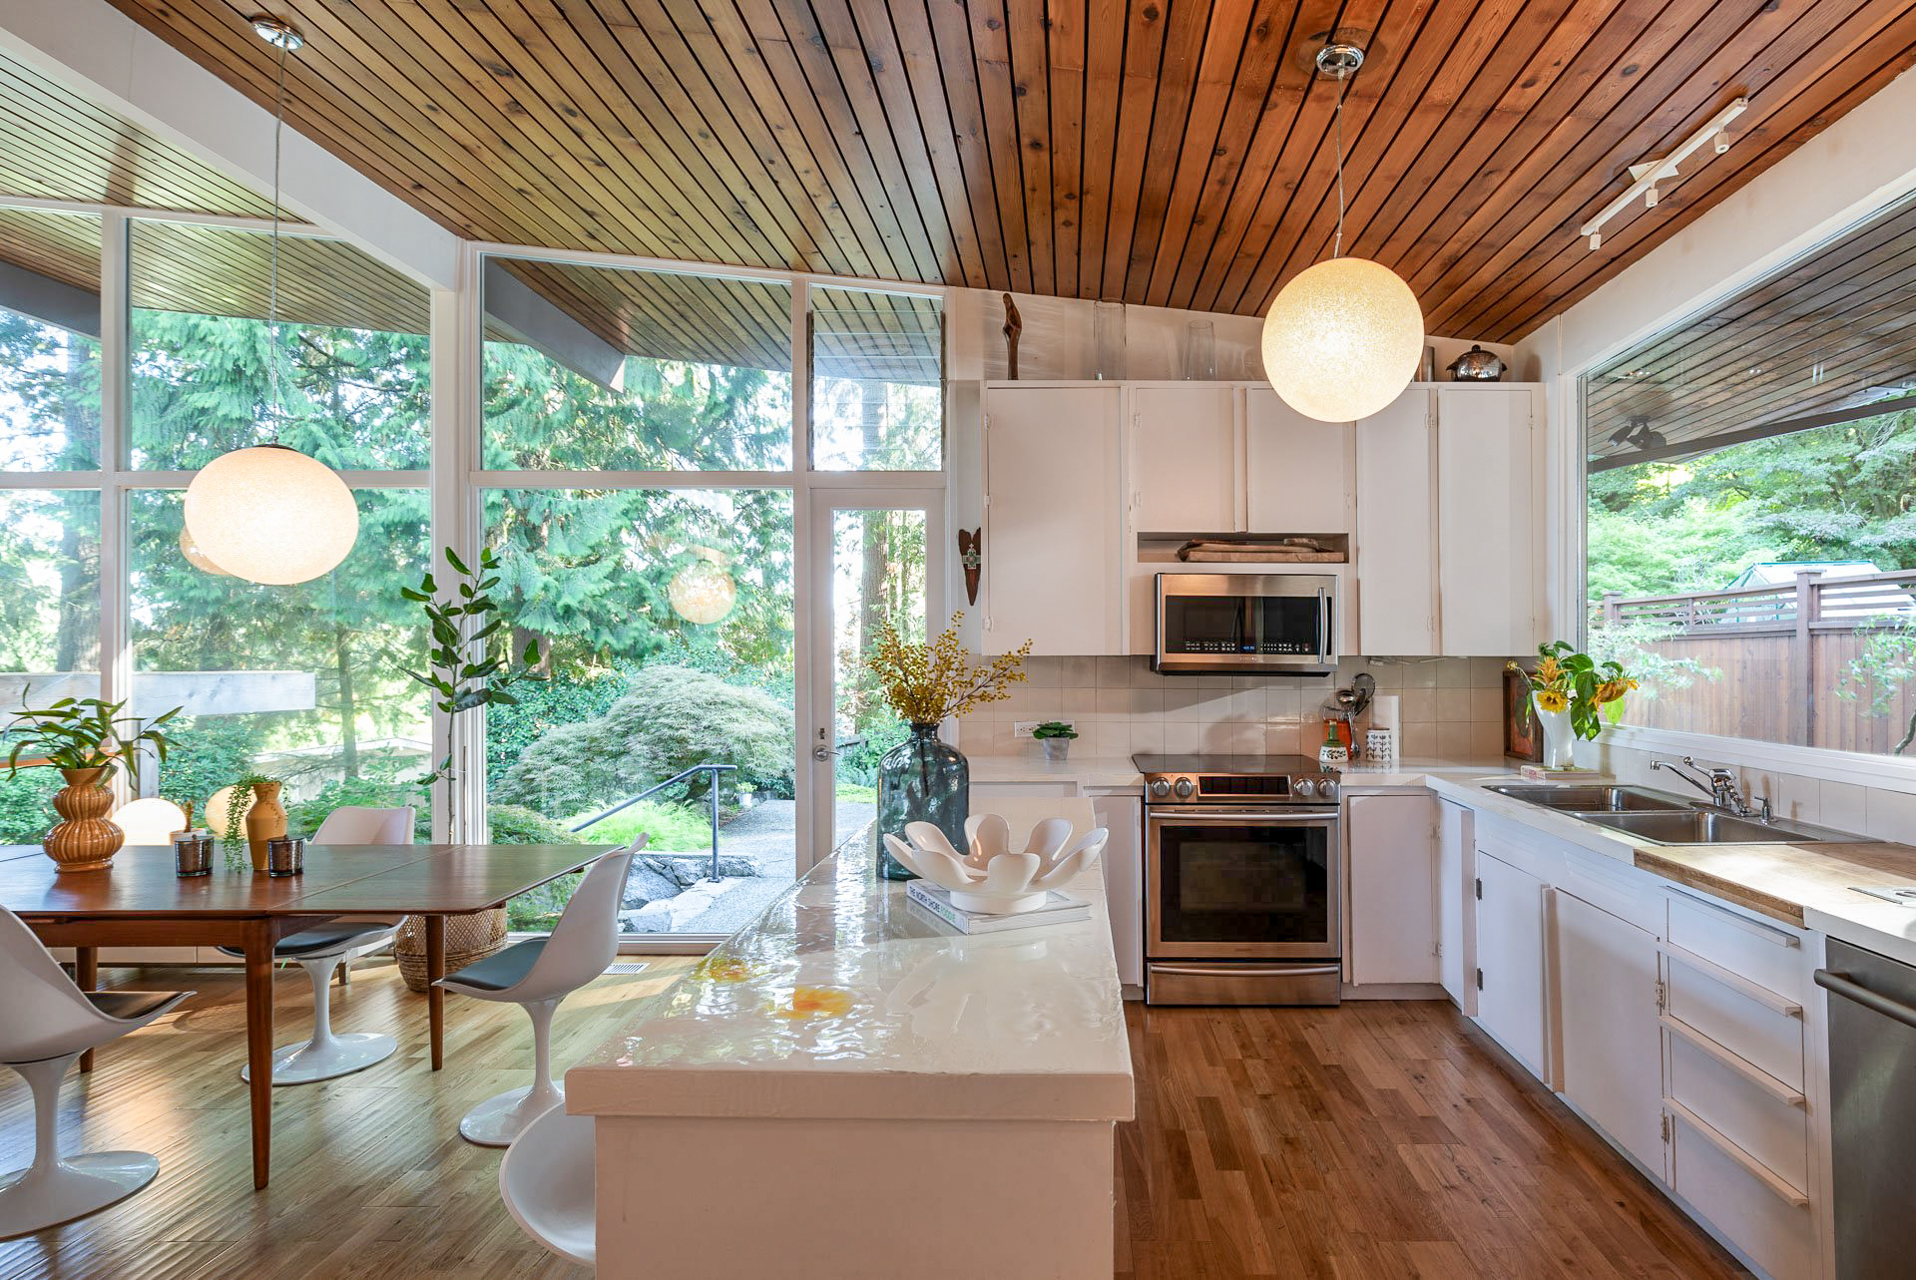 661 East Windsor Road, North Vancouver - sold west coast modern - photo 4